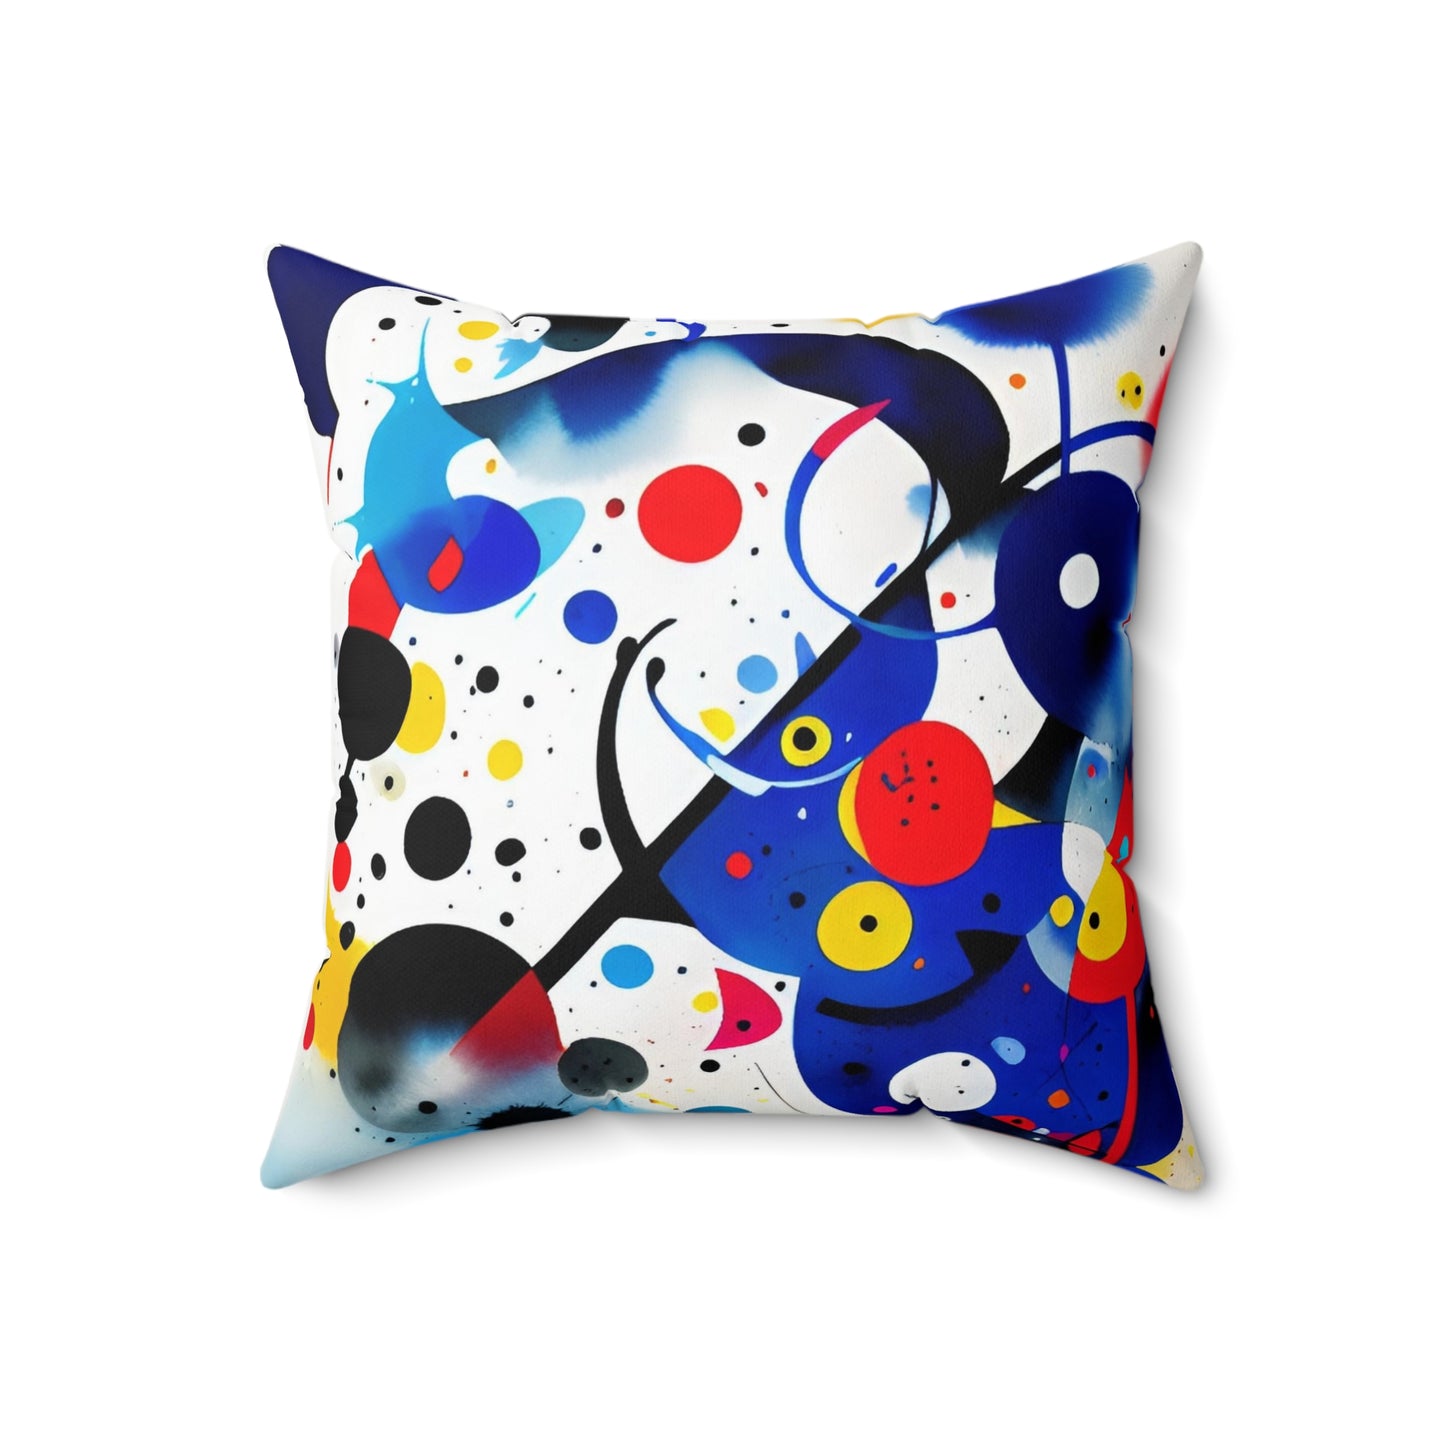 Spun Polyester Square Pillow, Inspired by Miro